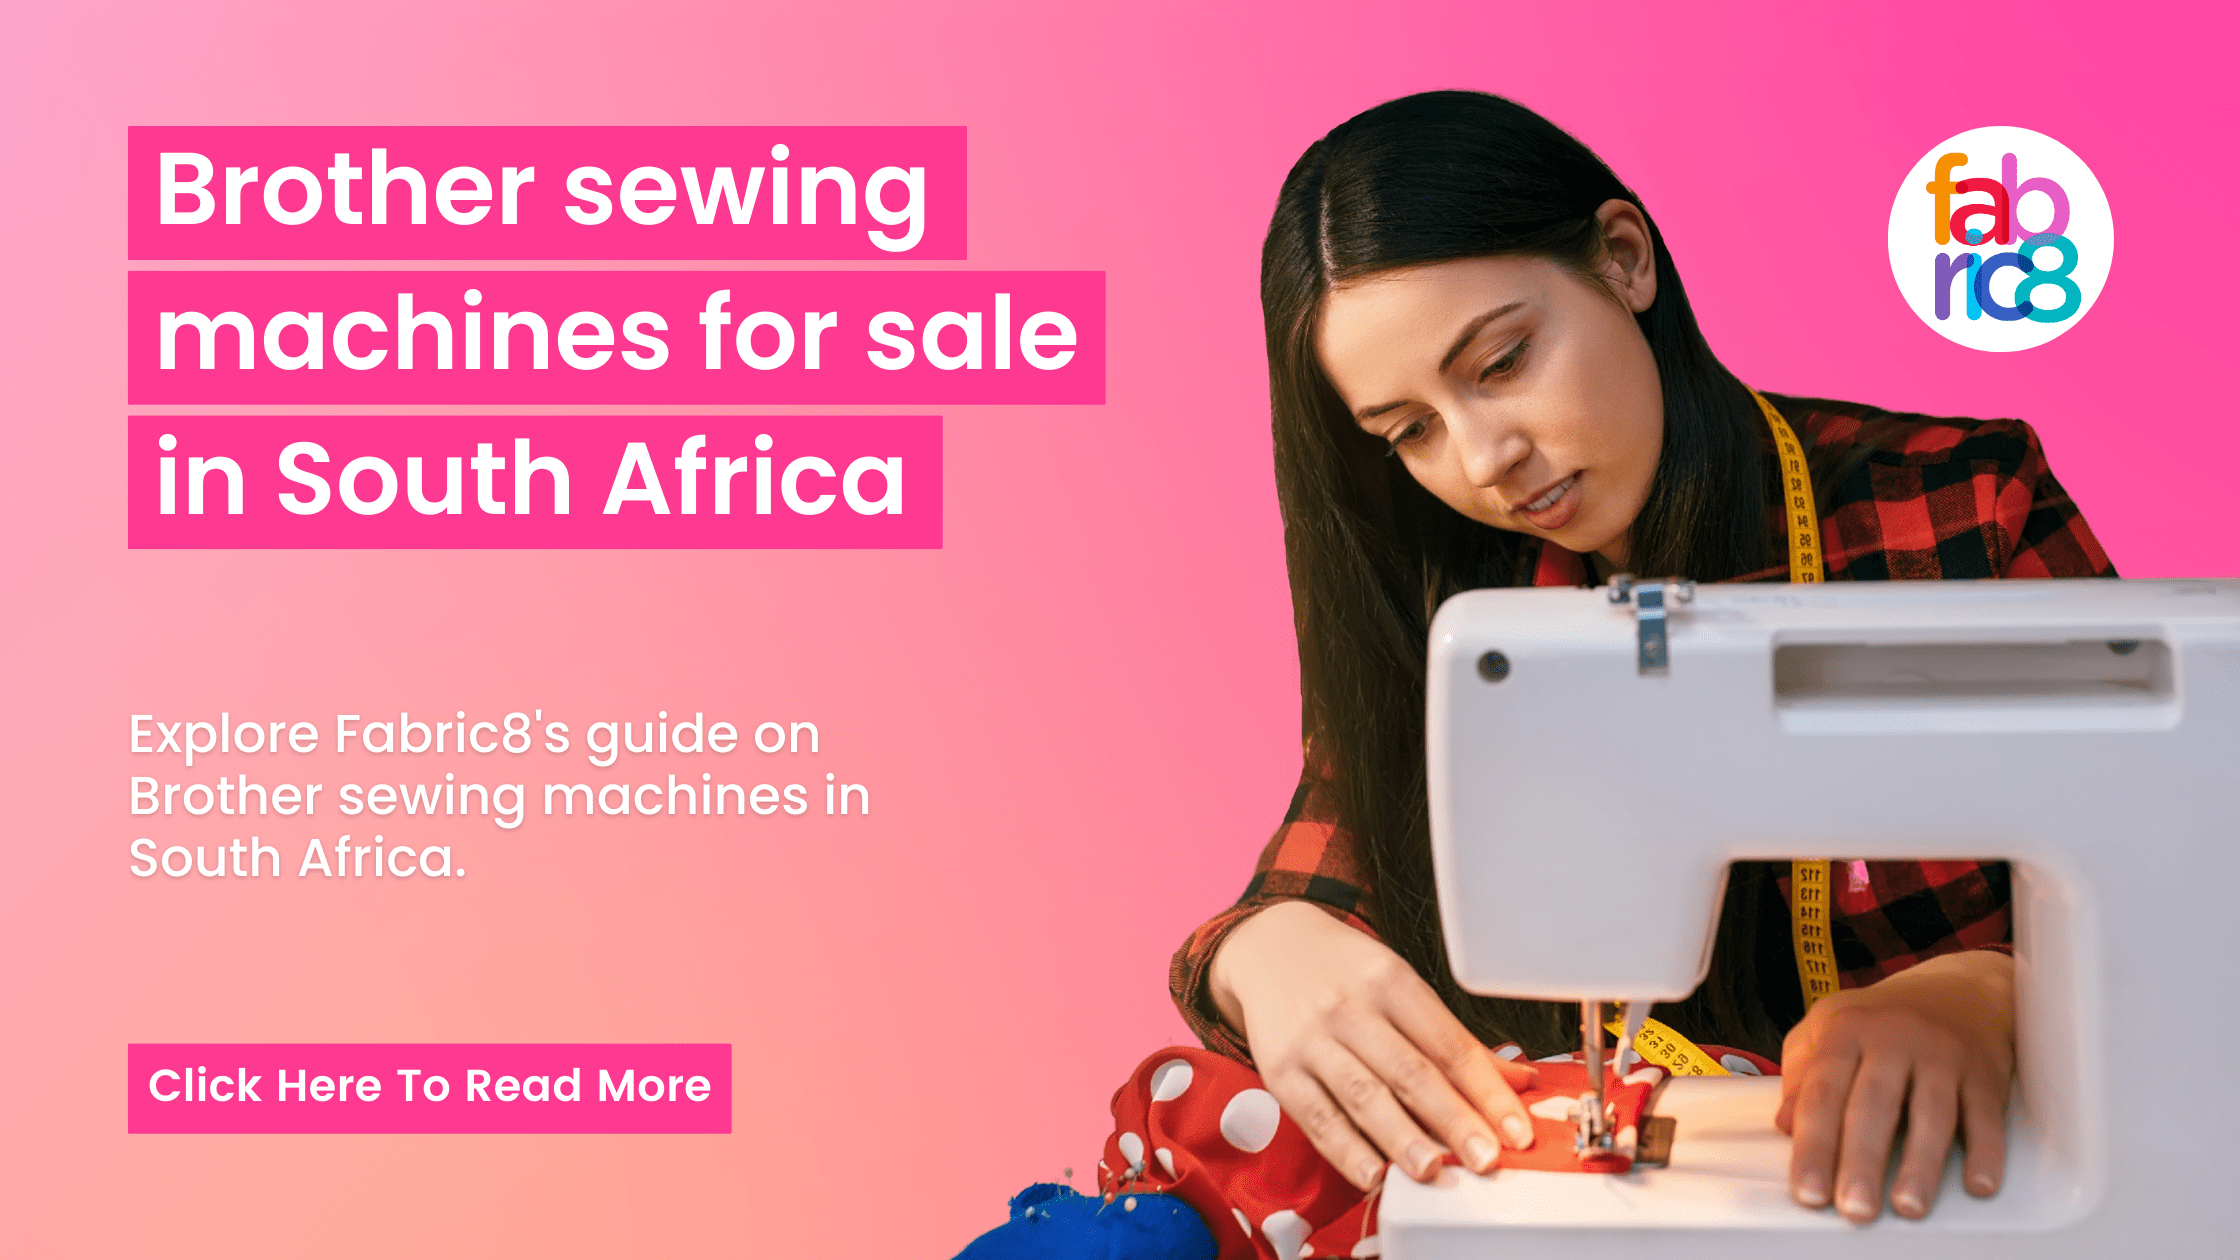 pink background with girl sewing on sewing machines and text stating brother sewing machines for sale in South Africa